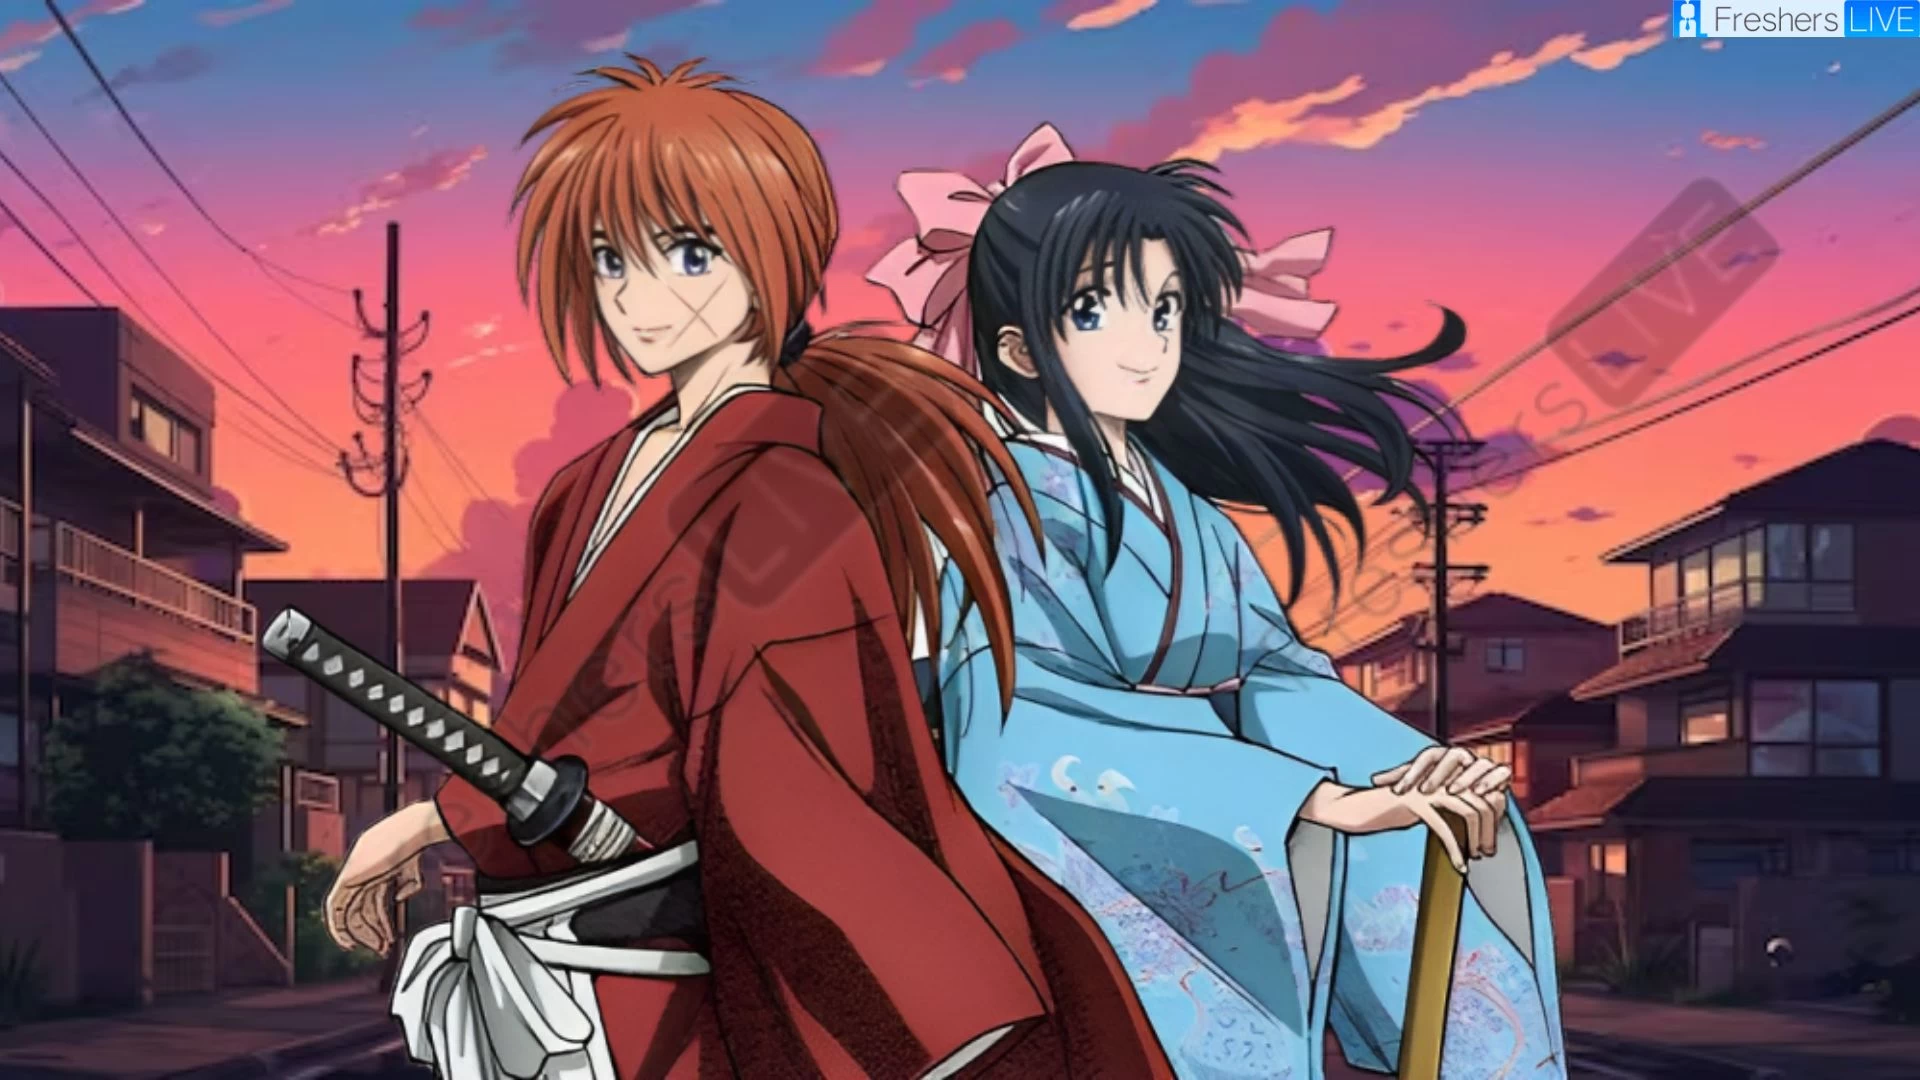 Rurouni Kenshin Season 1 Episode 14 Release Date and Time, Countdown, When is it Coming Out?